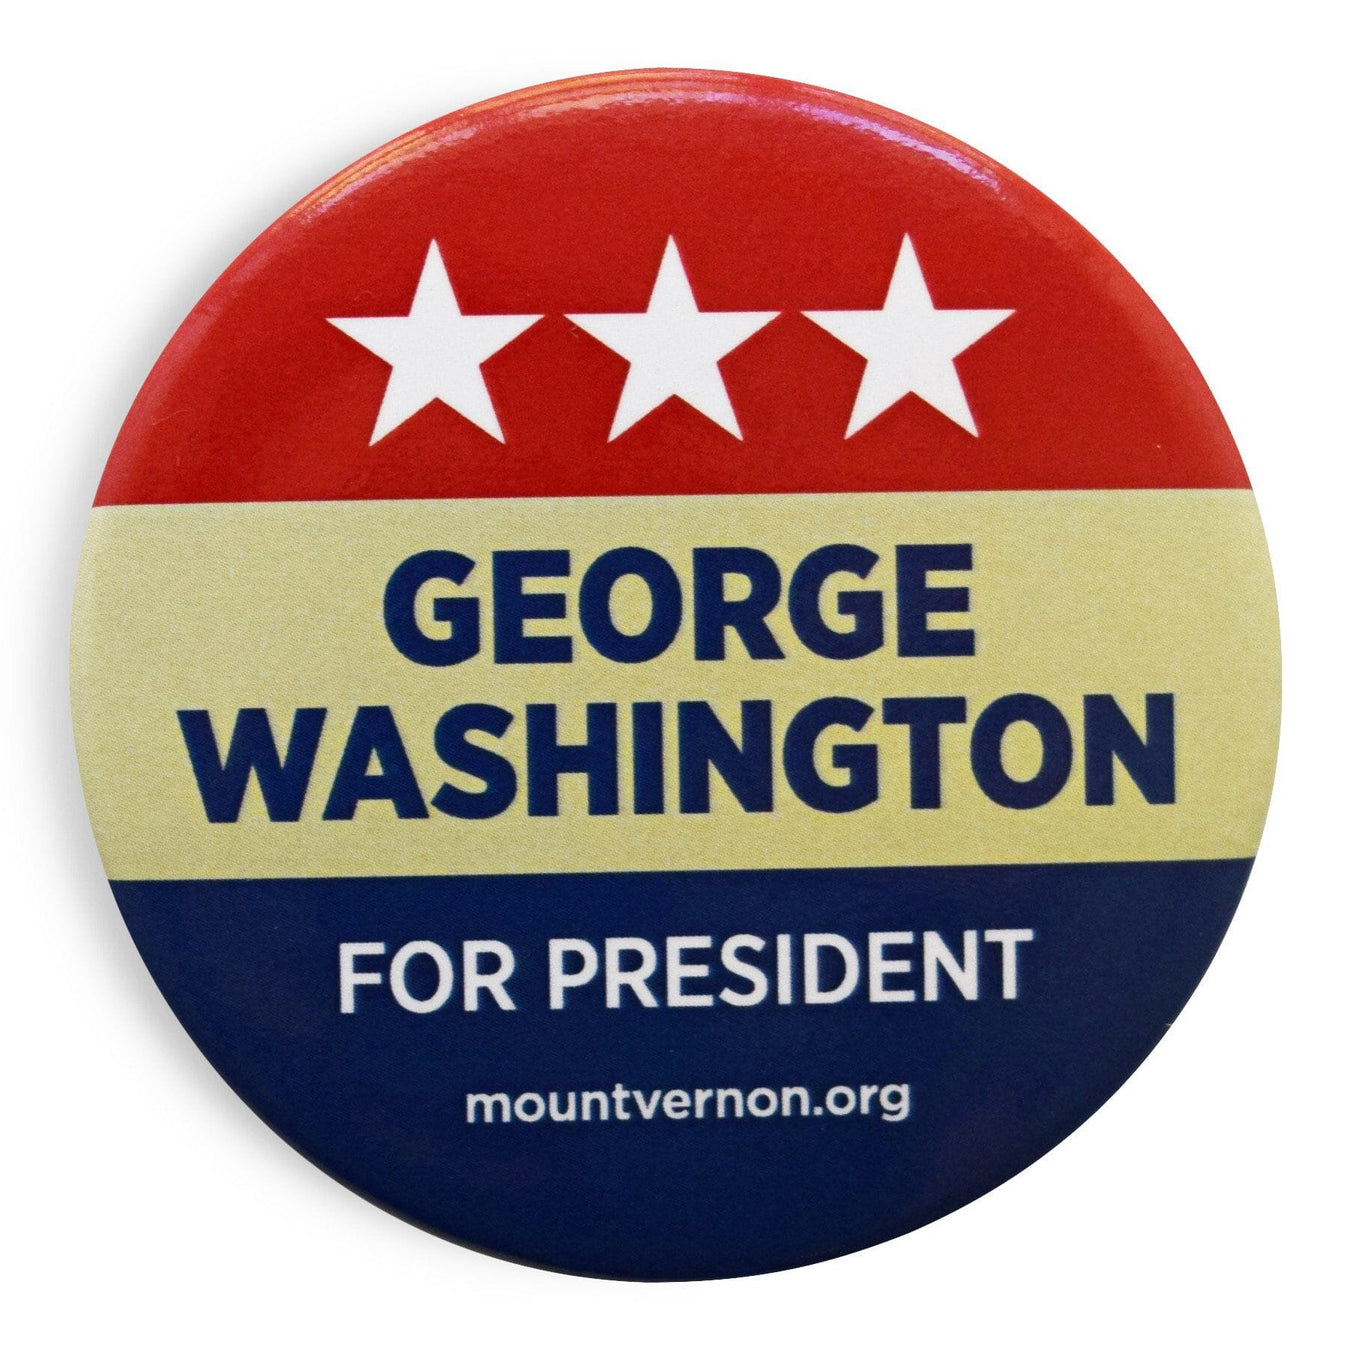 George Washington for President Button - The Shops at Mount Vernon - The Shops at Mount Vernon